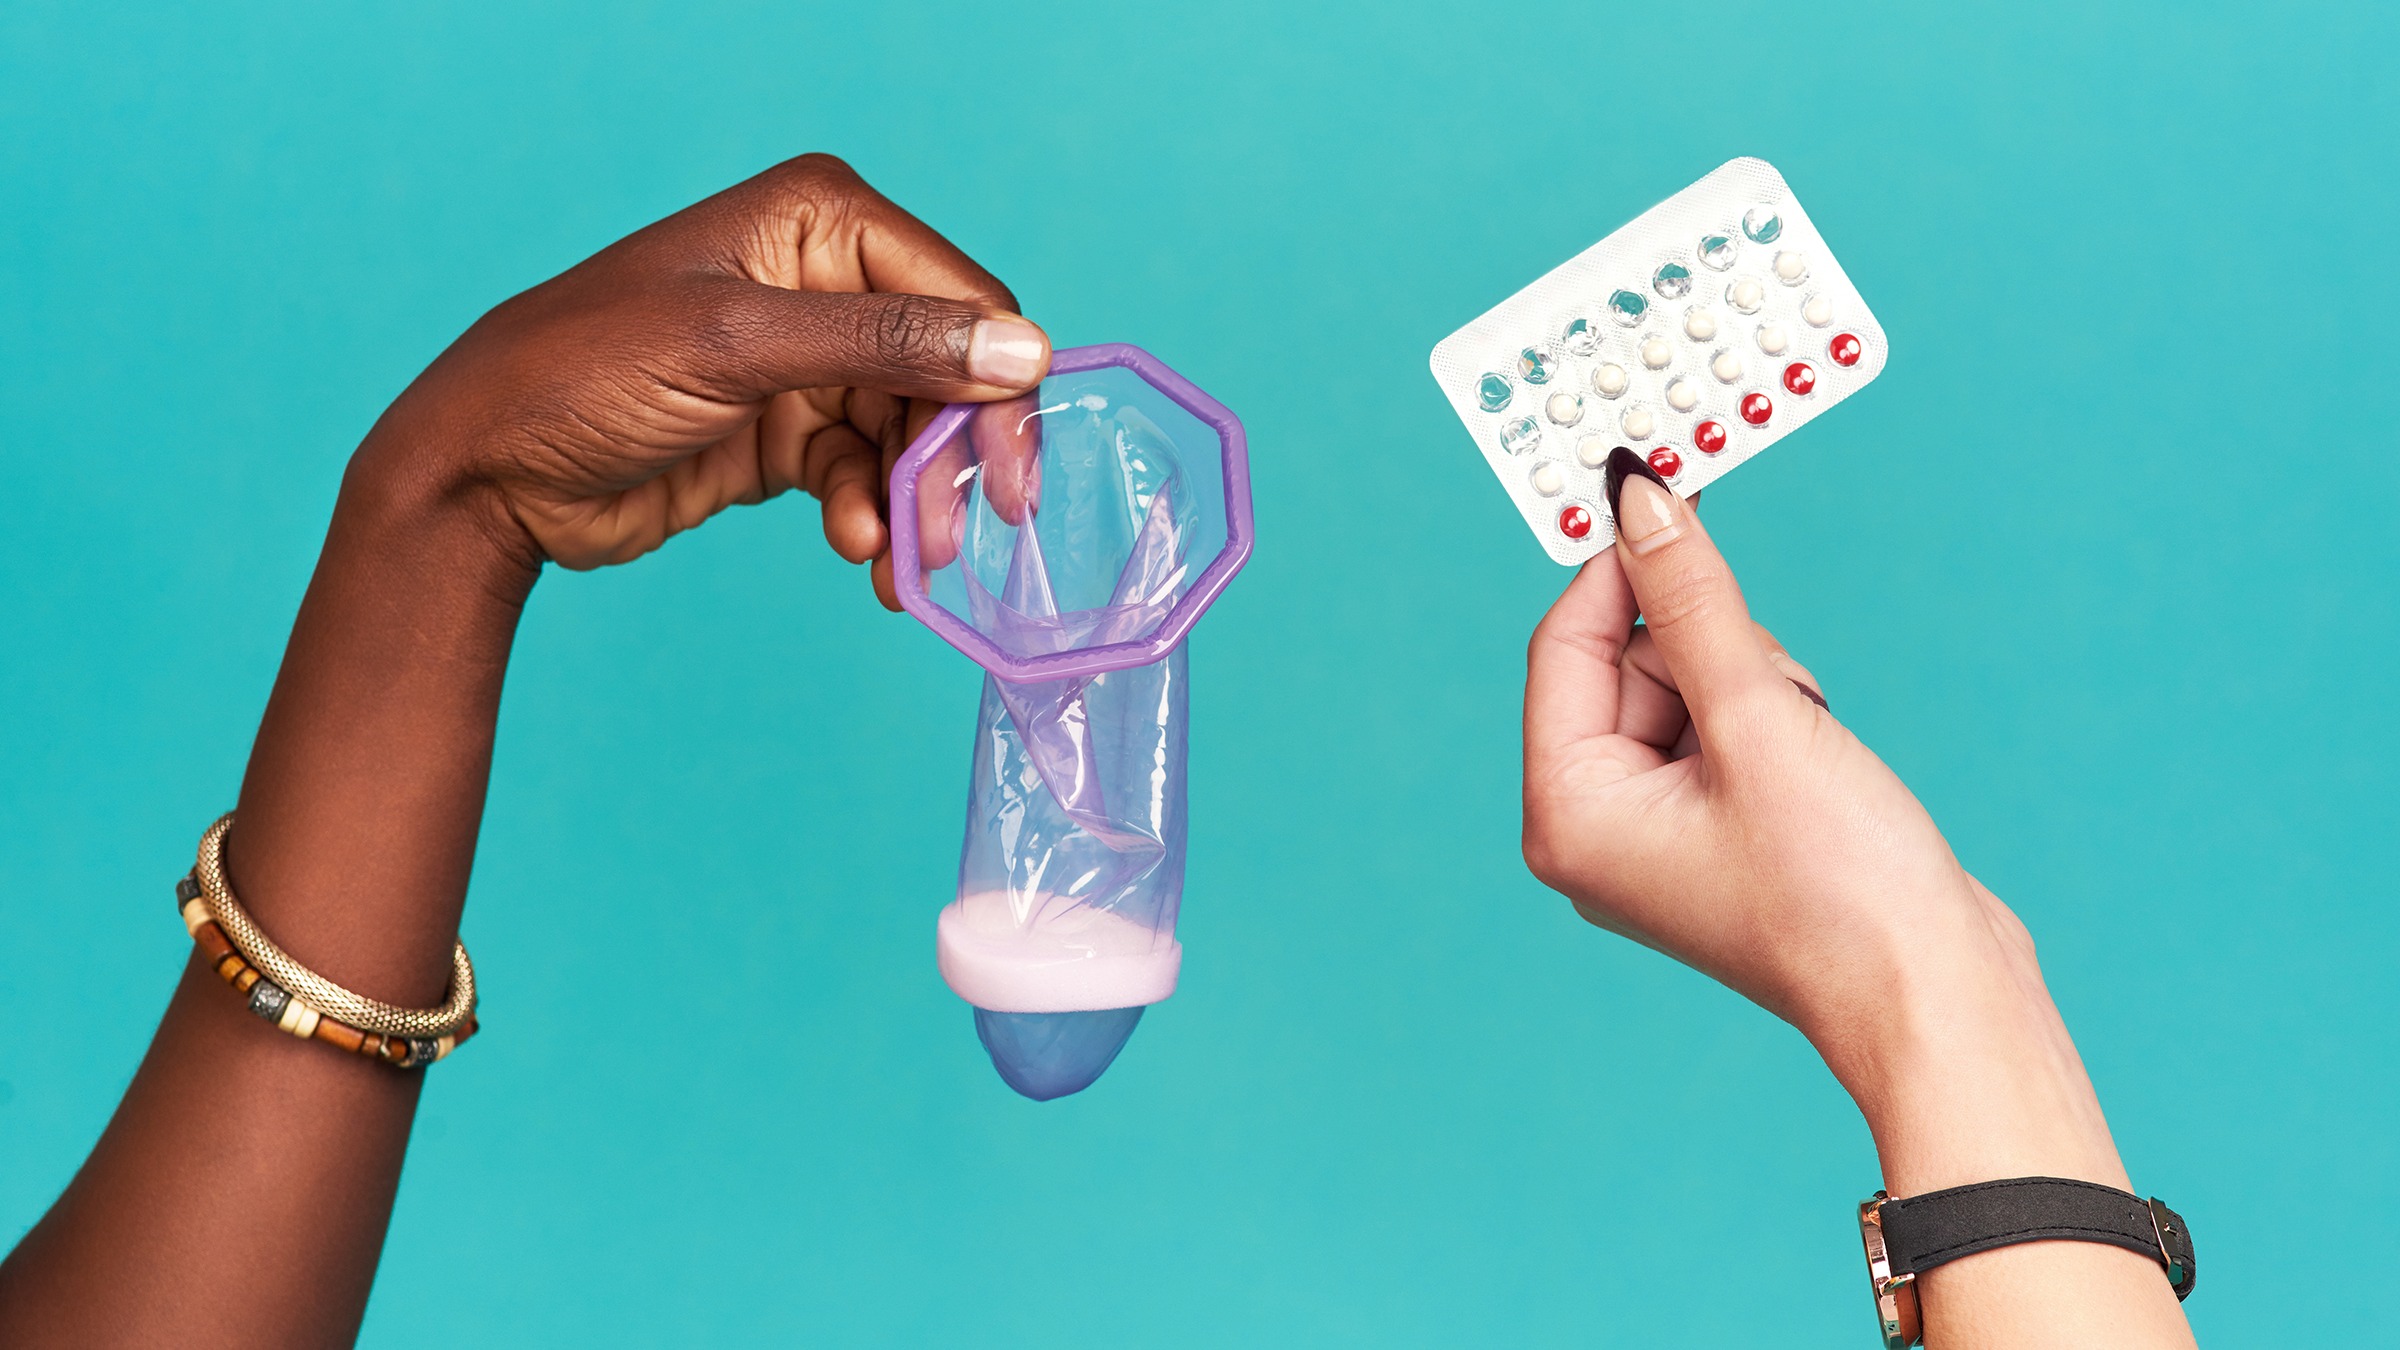 Cropped shot of two arms coming into frame holding different types of contraceptives. One is holding a birth control pill pack and the other is holding a condom.
PeopleImages/iStock via Getty Images